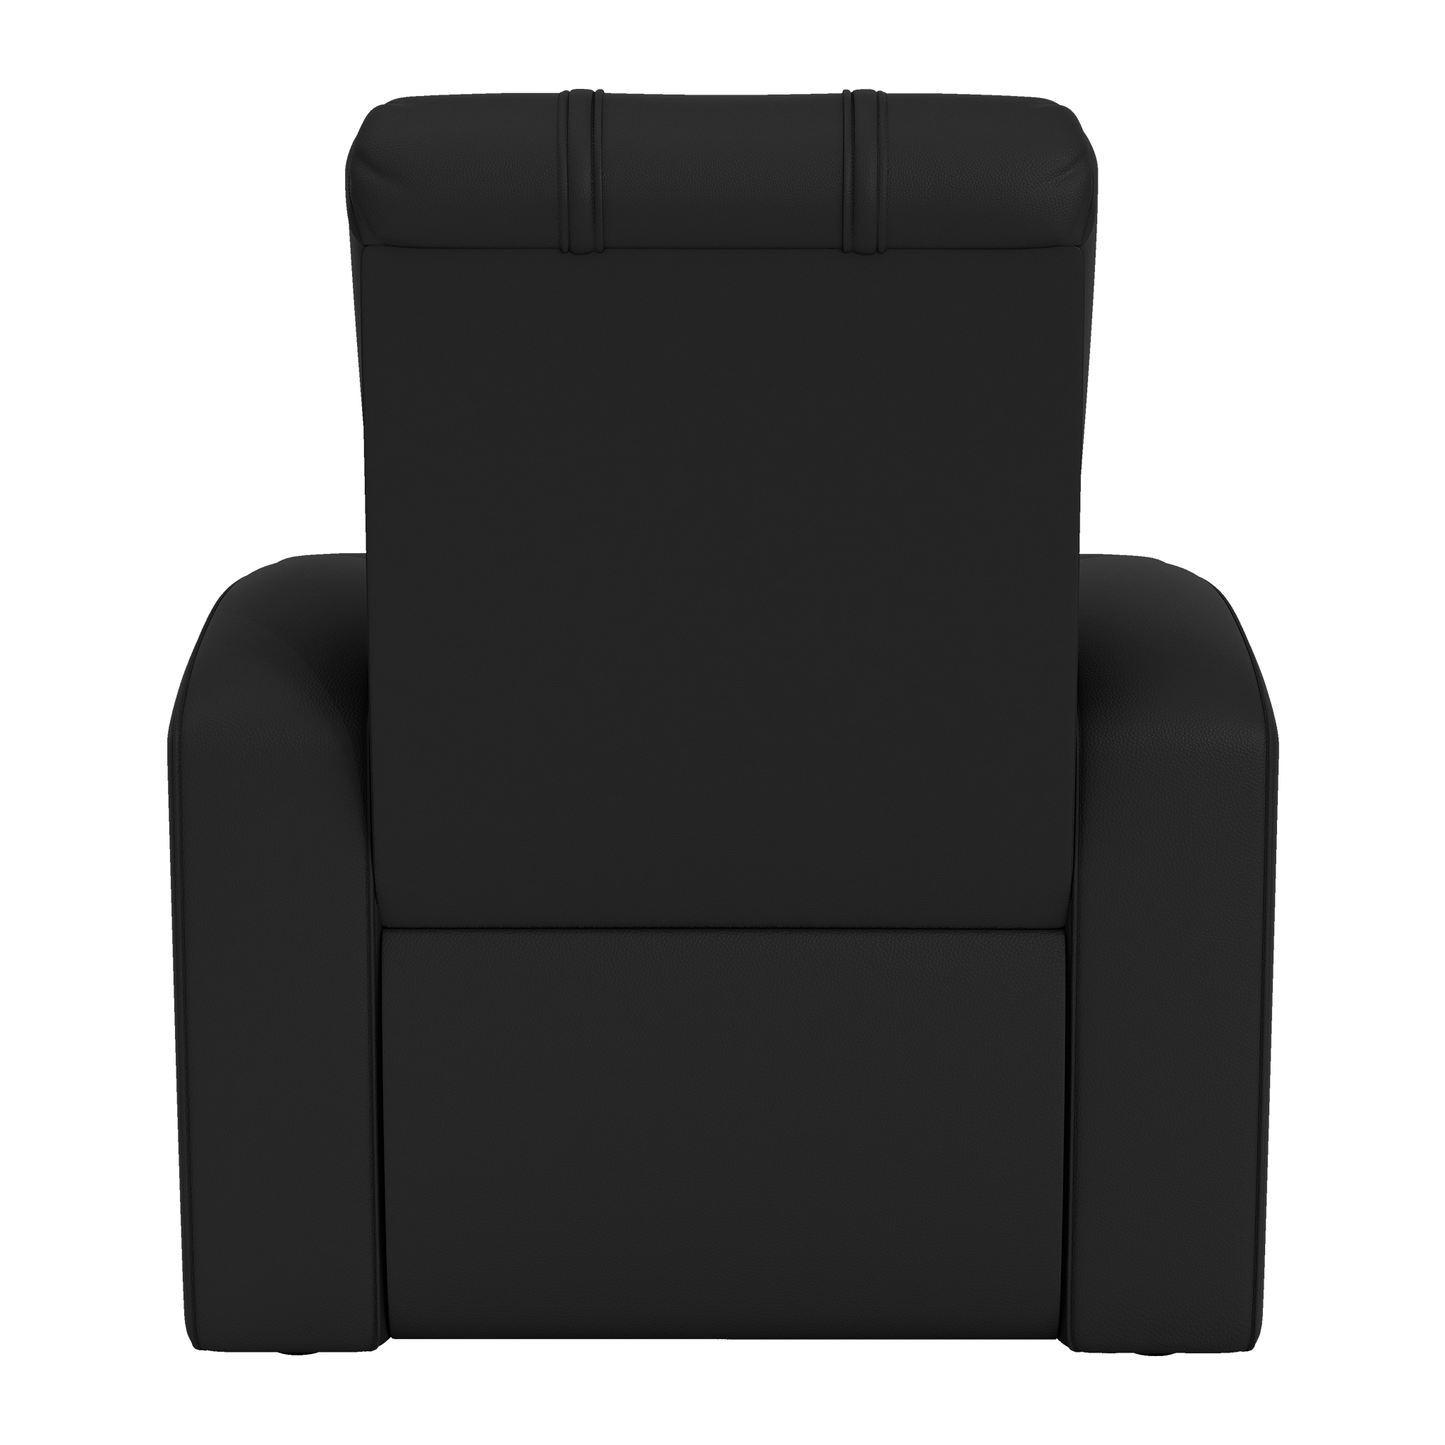 Relax Home Theater Recliner with Carolina Hurricanes Logo